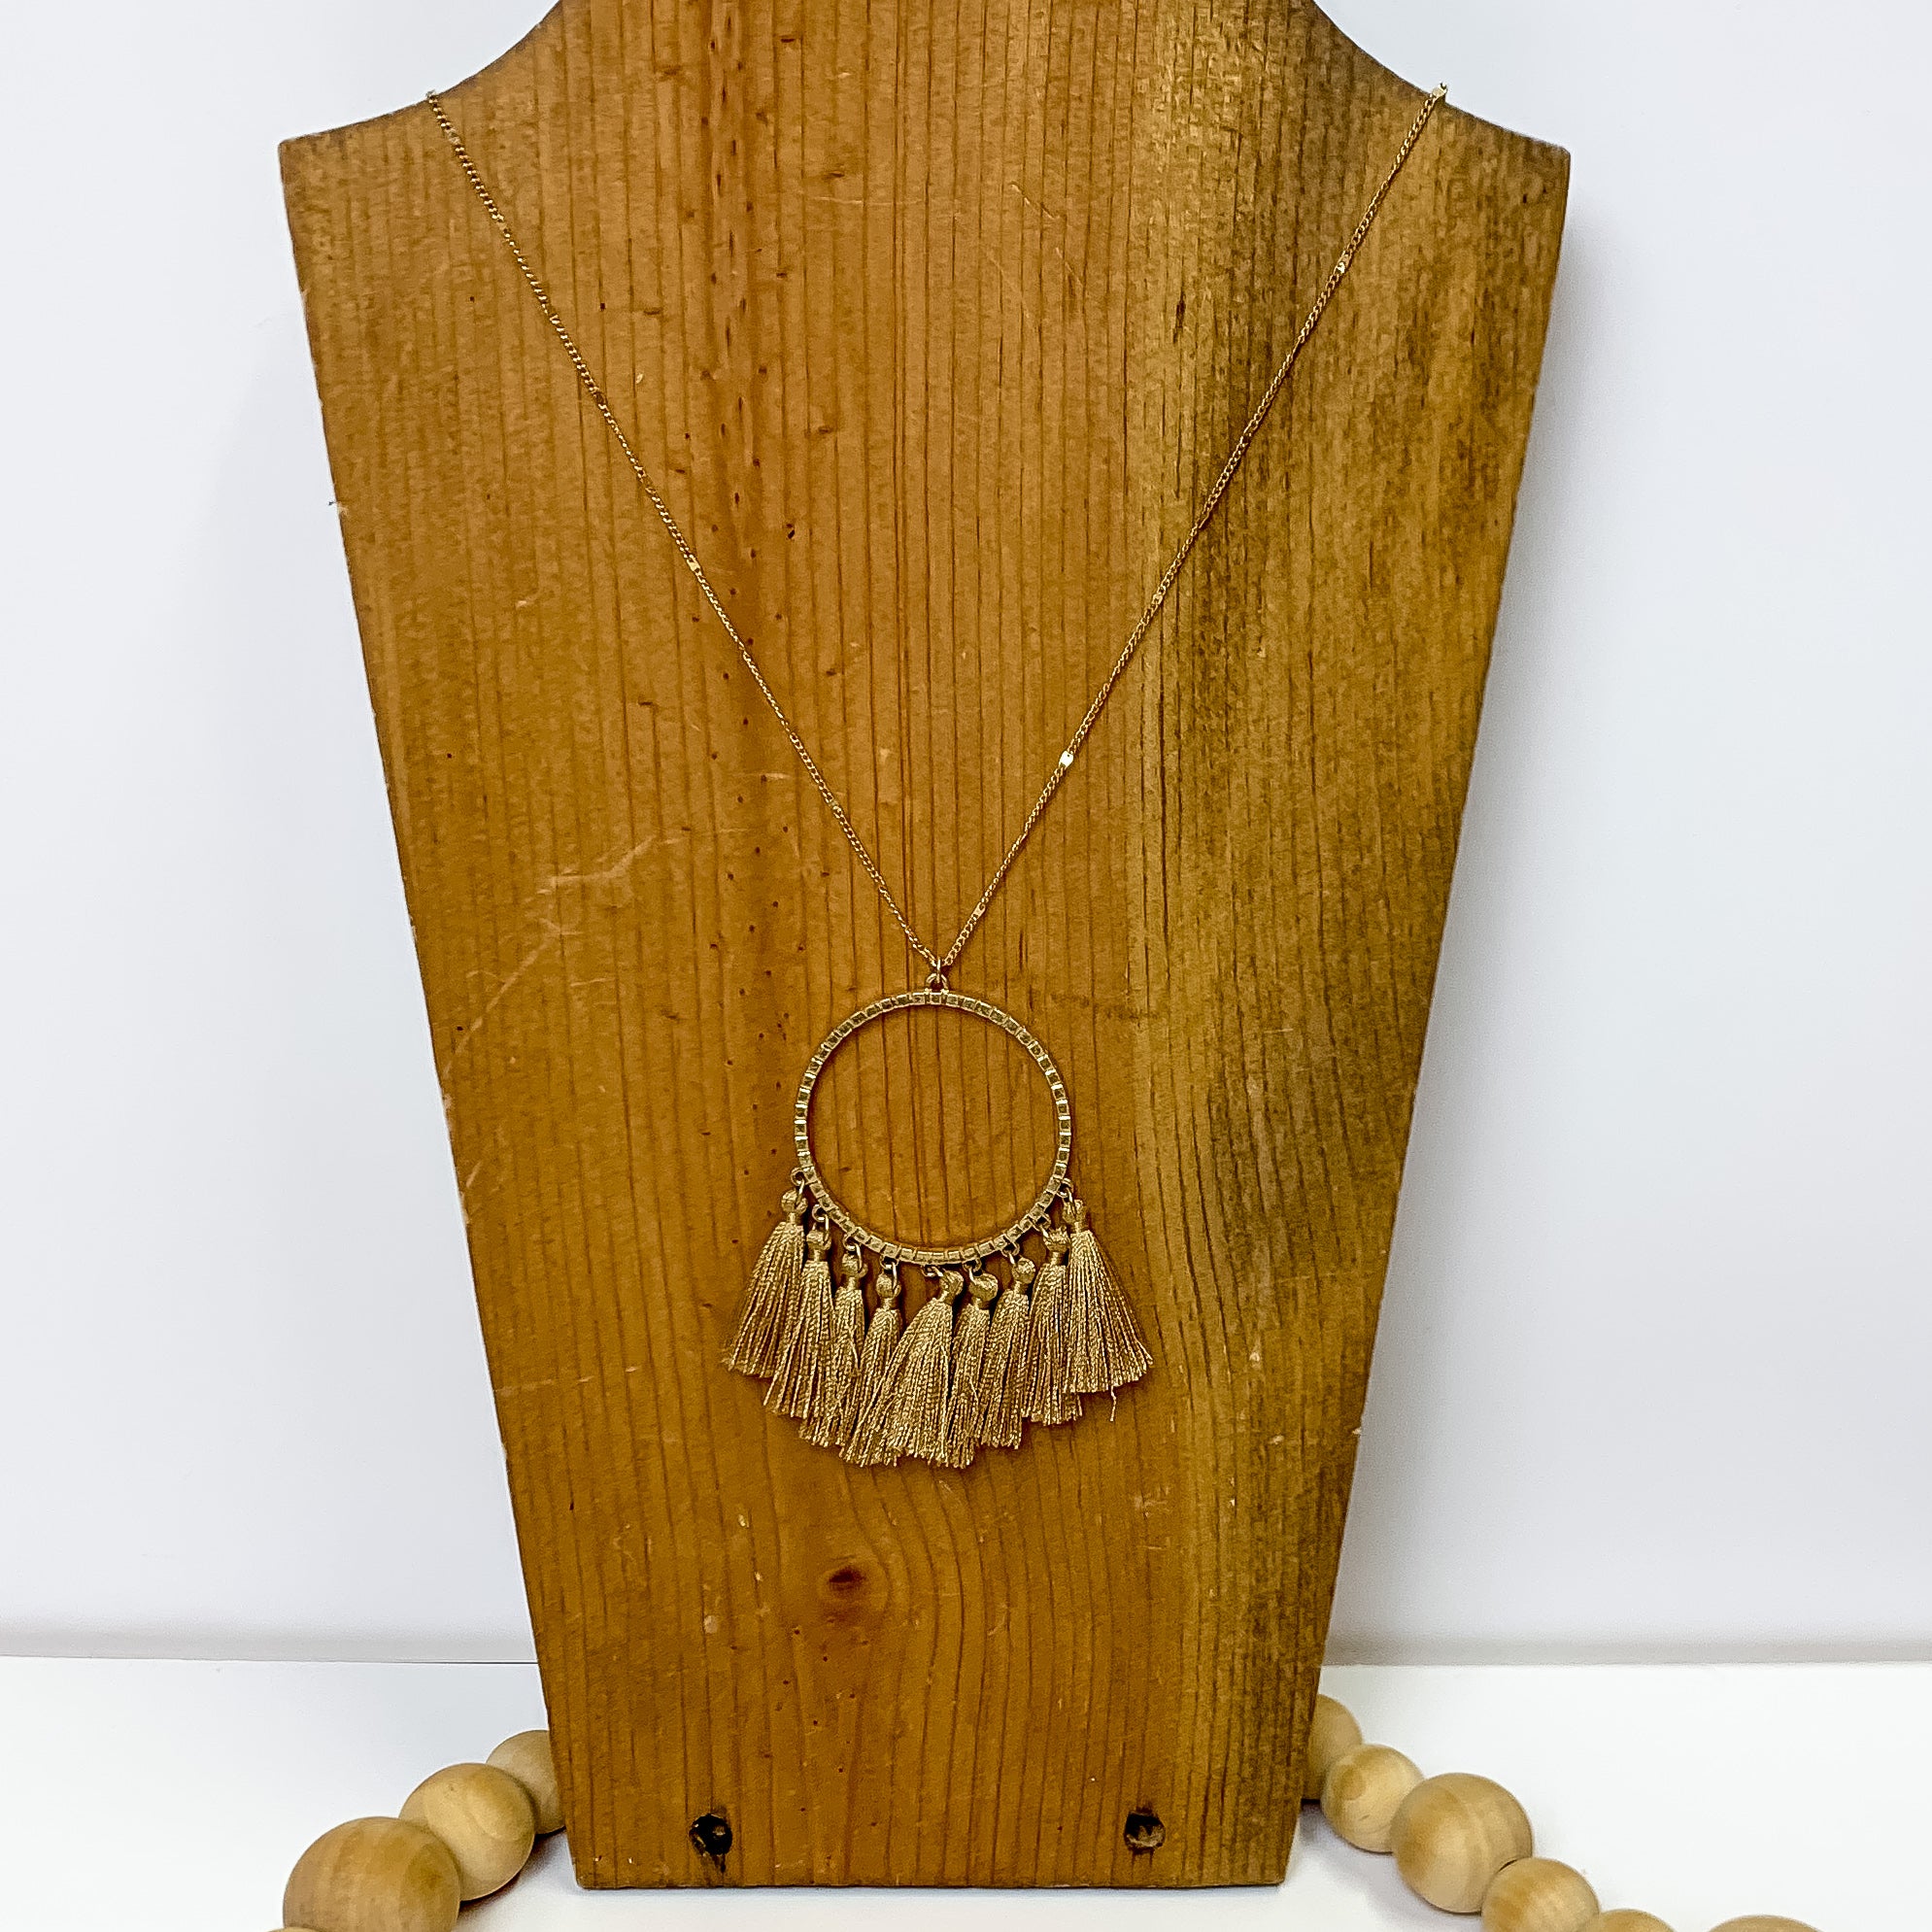 Gold Chain Open Circle Necklace with Fringe Tassels in Tan Brown